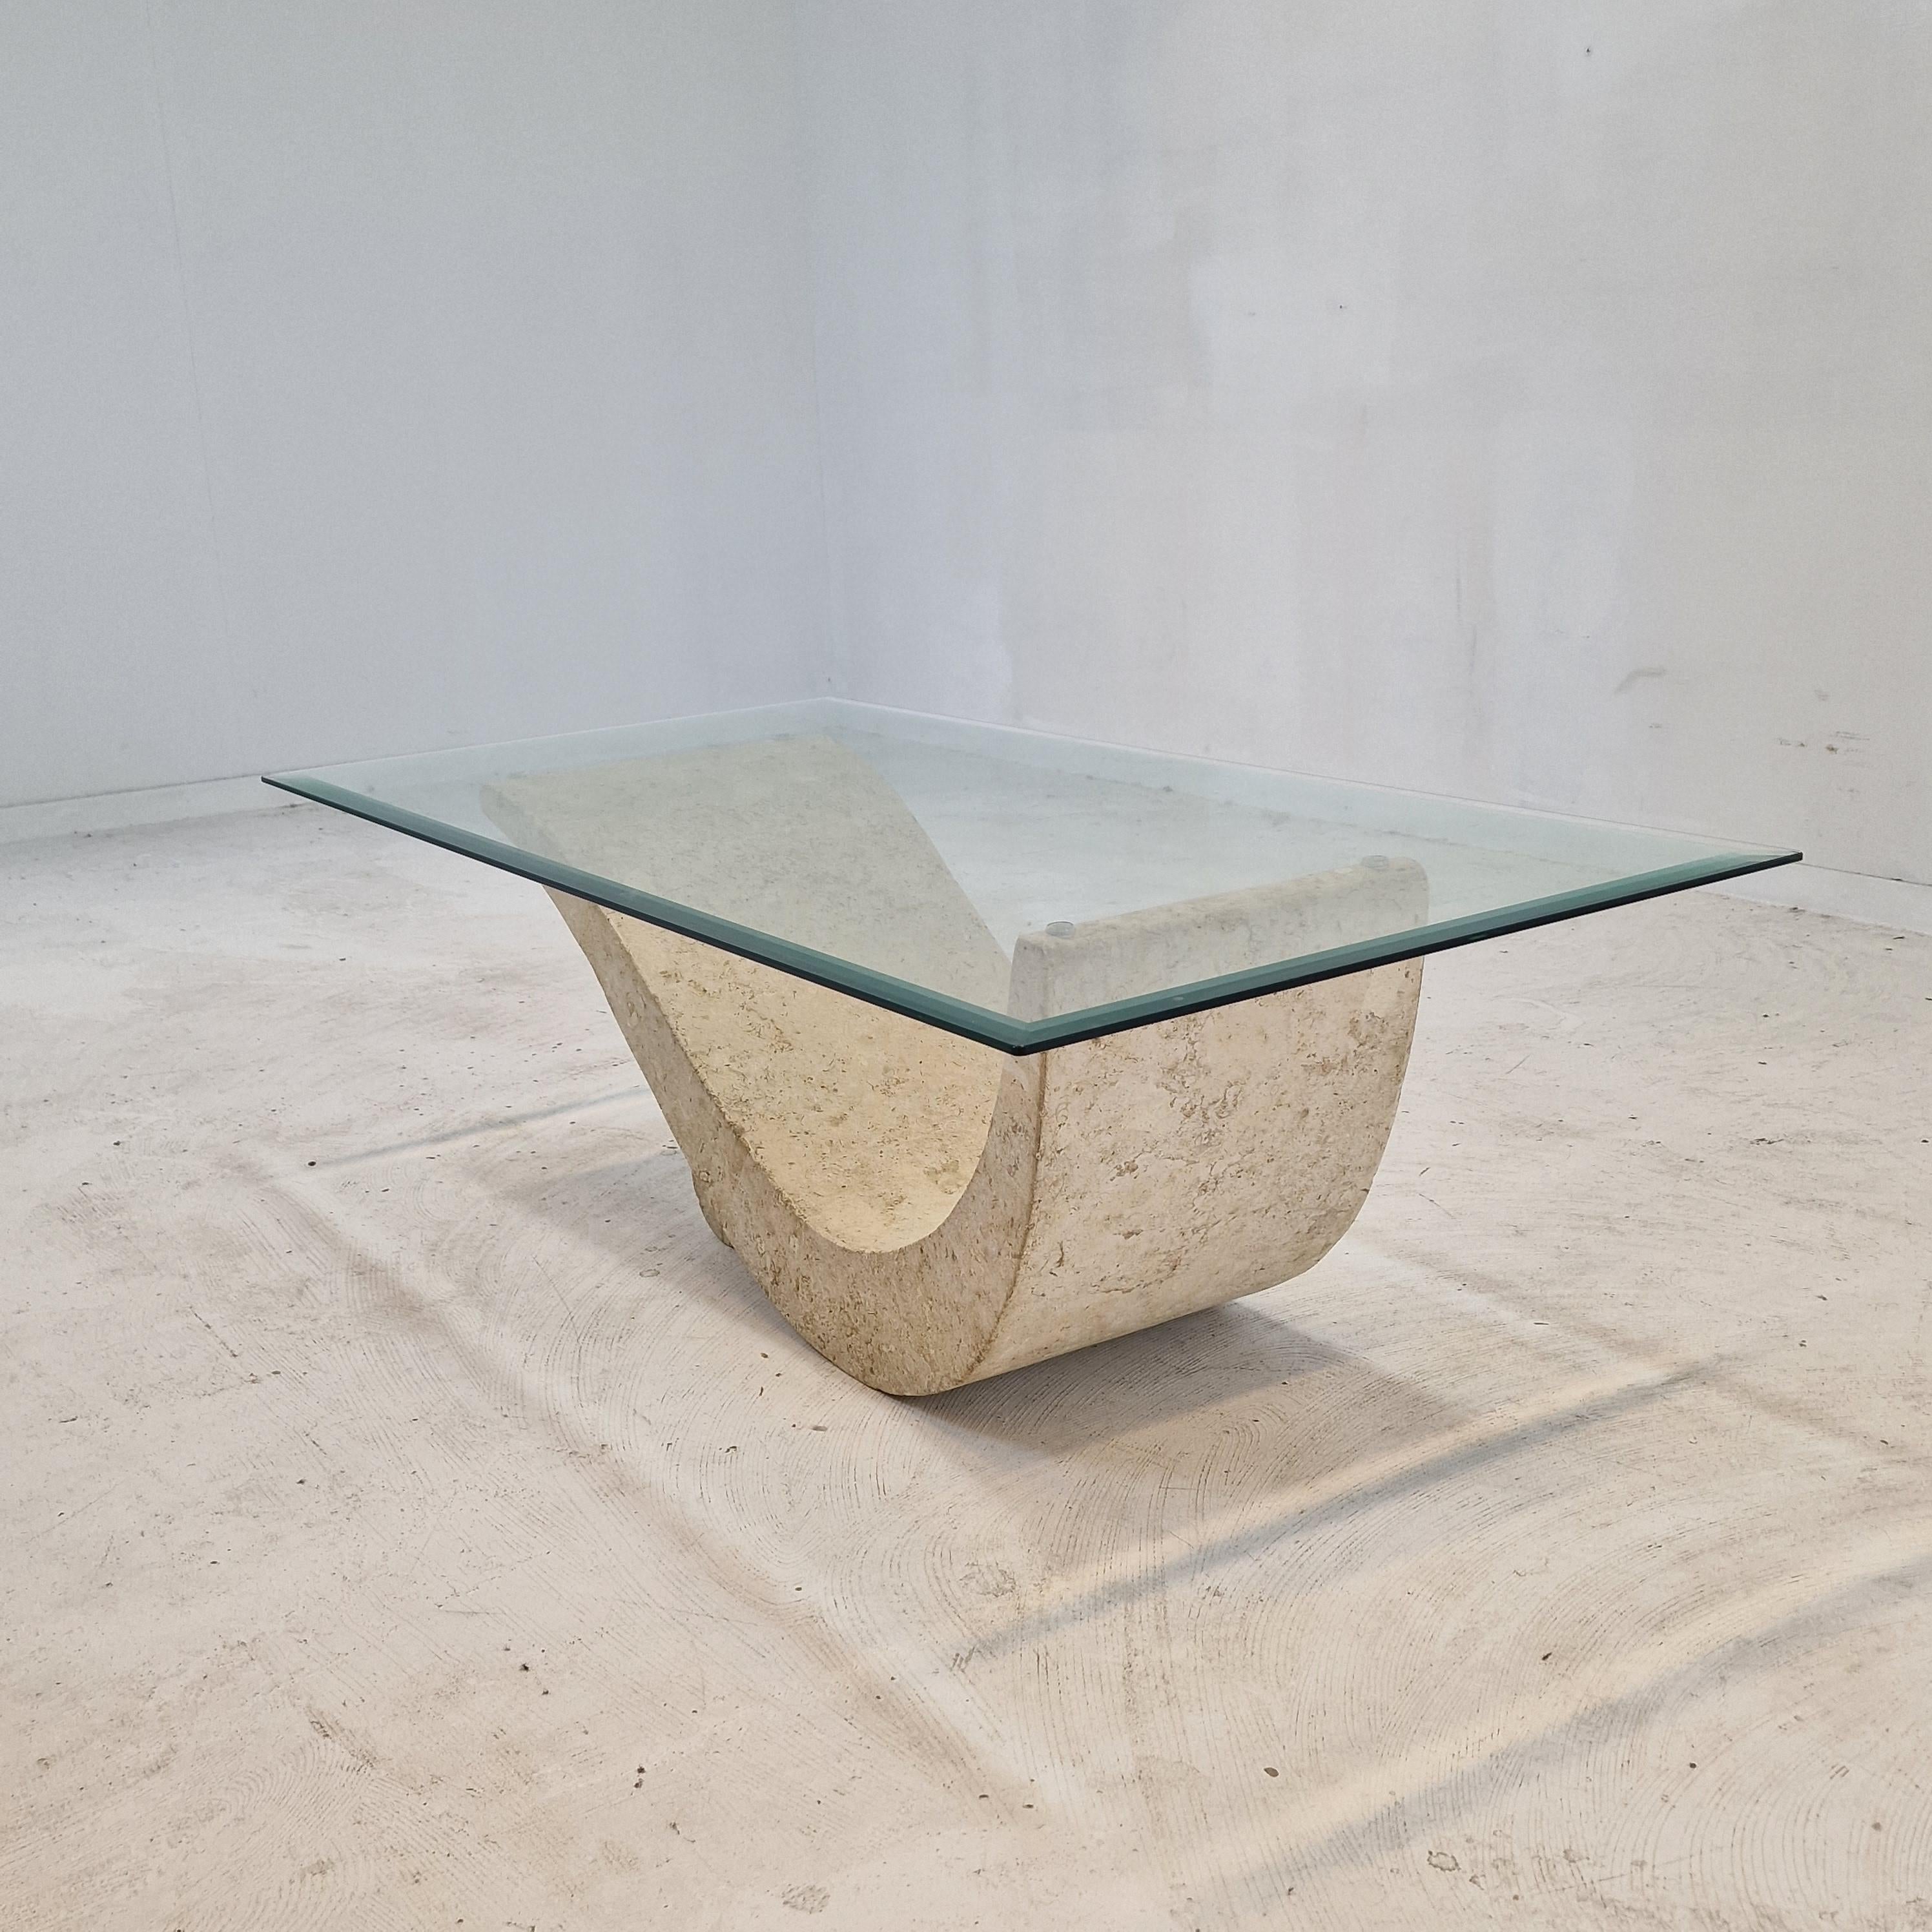 Glass Mactan Stone Coffee or Fossil Stone Table, 1990s